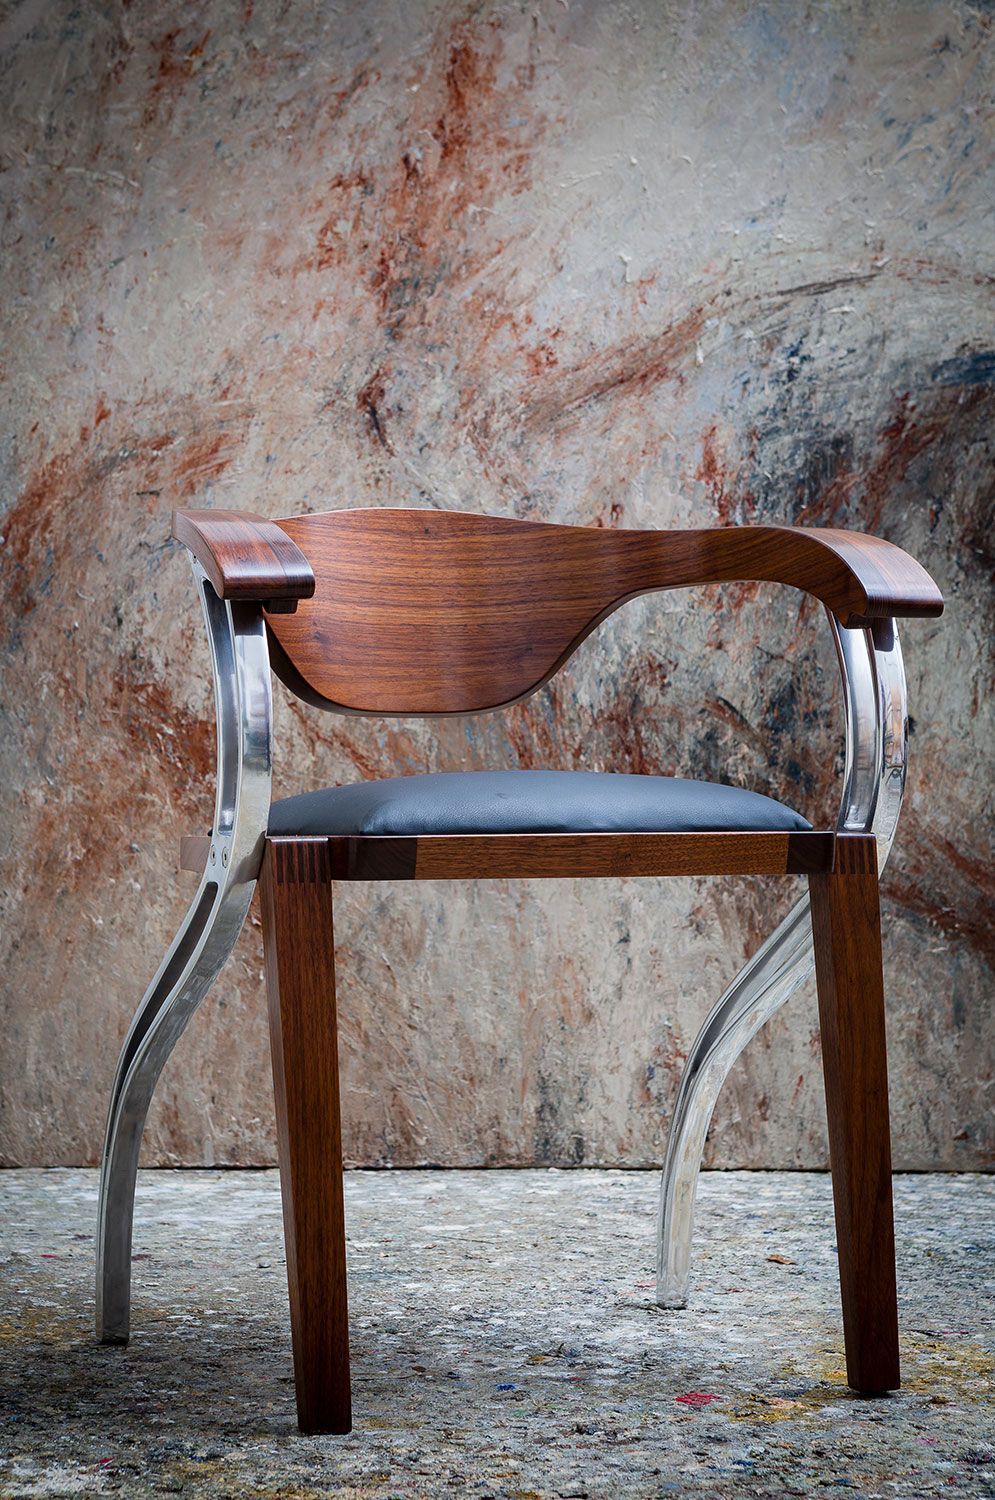 A  unique wooden chair with metal legs is sitting in front of a wall.